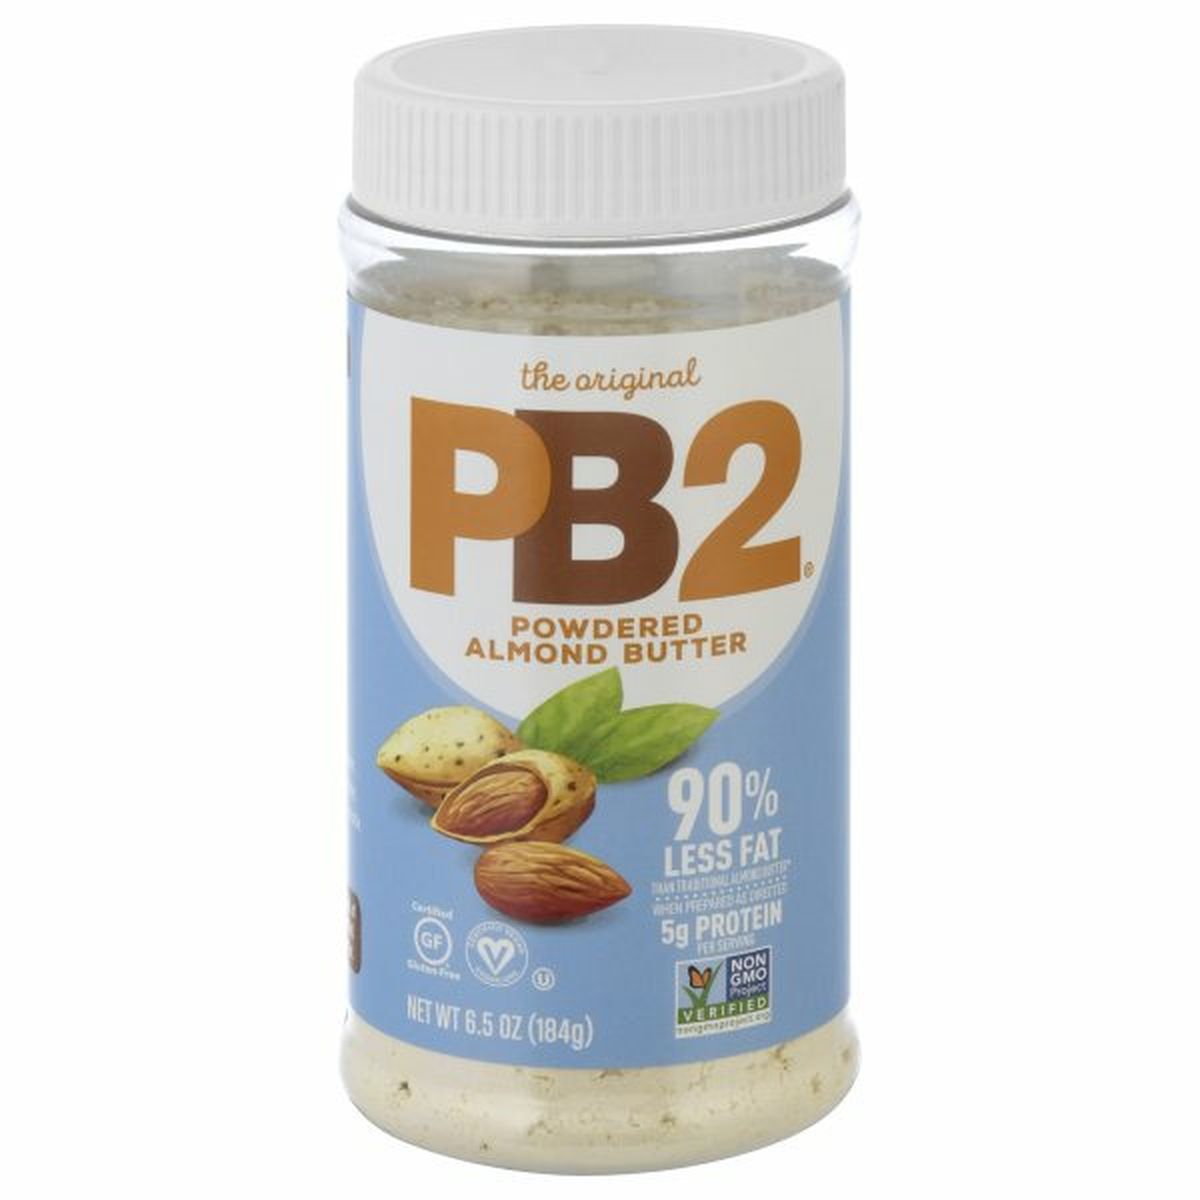 Calories in PB2 Almond Butter, Powdered